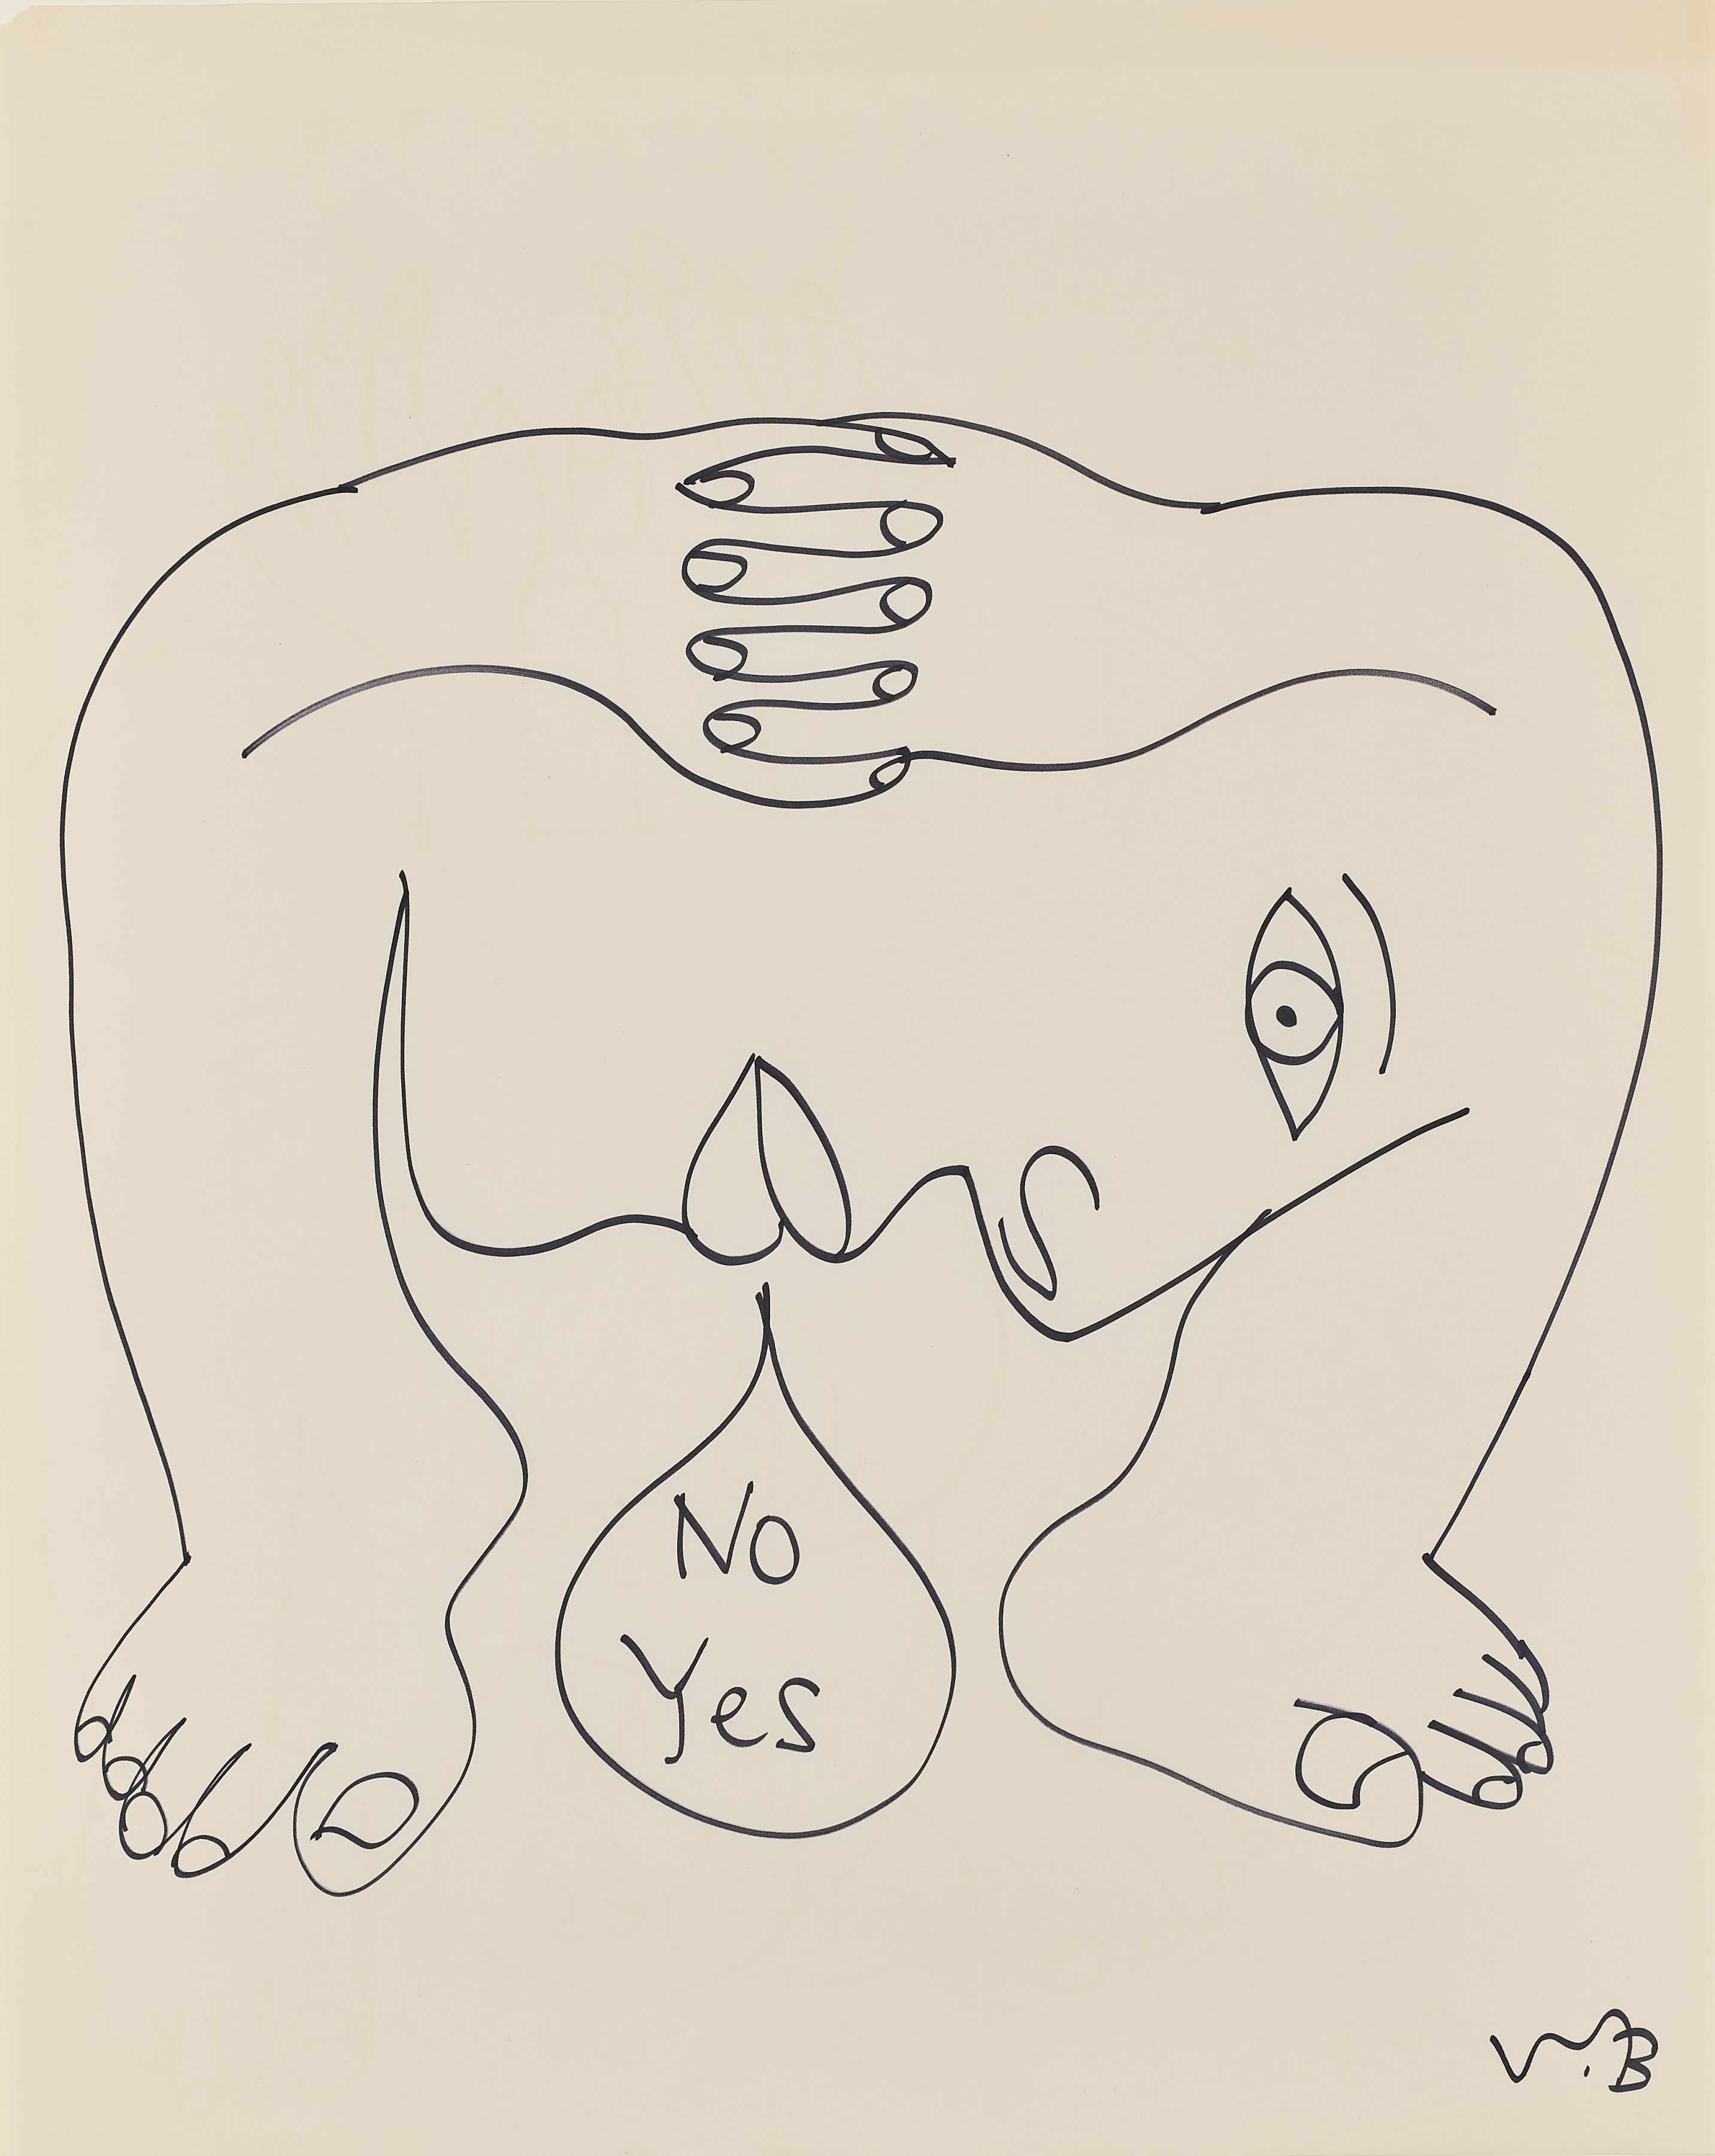 Walter Battiss

Untitled (No Yes, large profile under clasped hands), 1970

ink on paper

80 x 64 cm (31.5 x 25.2 in)

Enquire